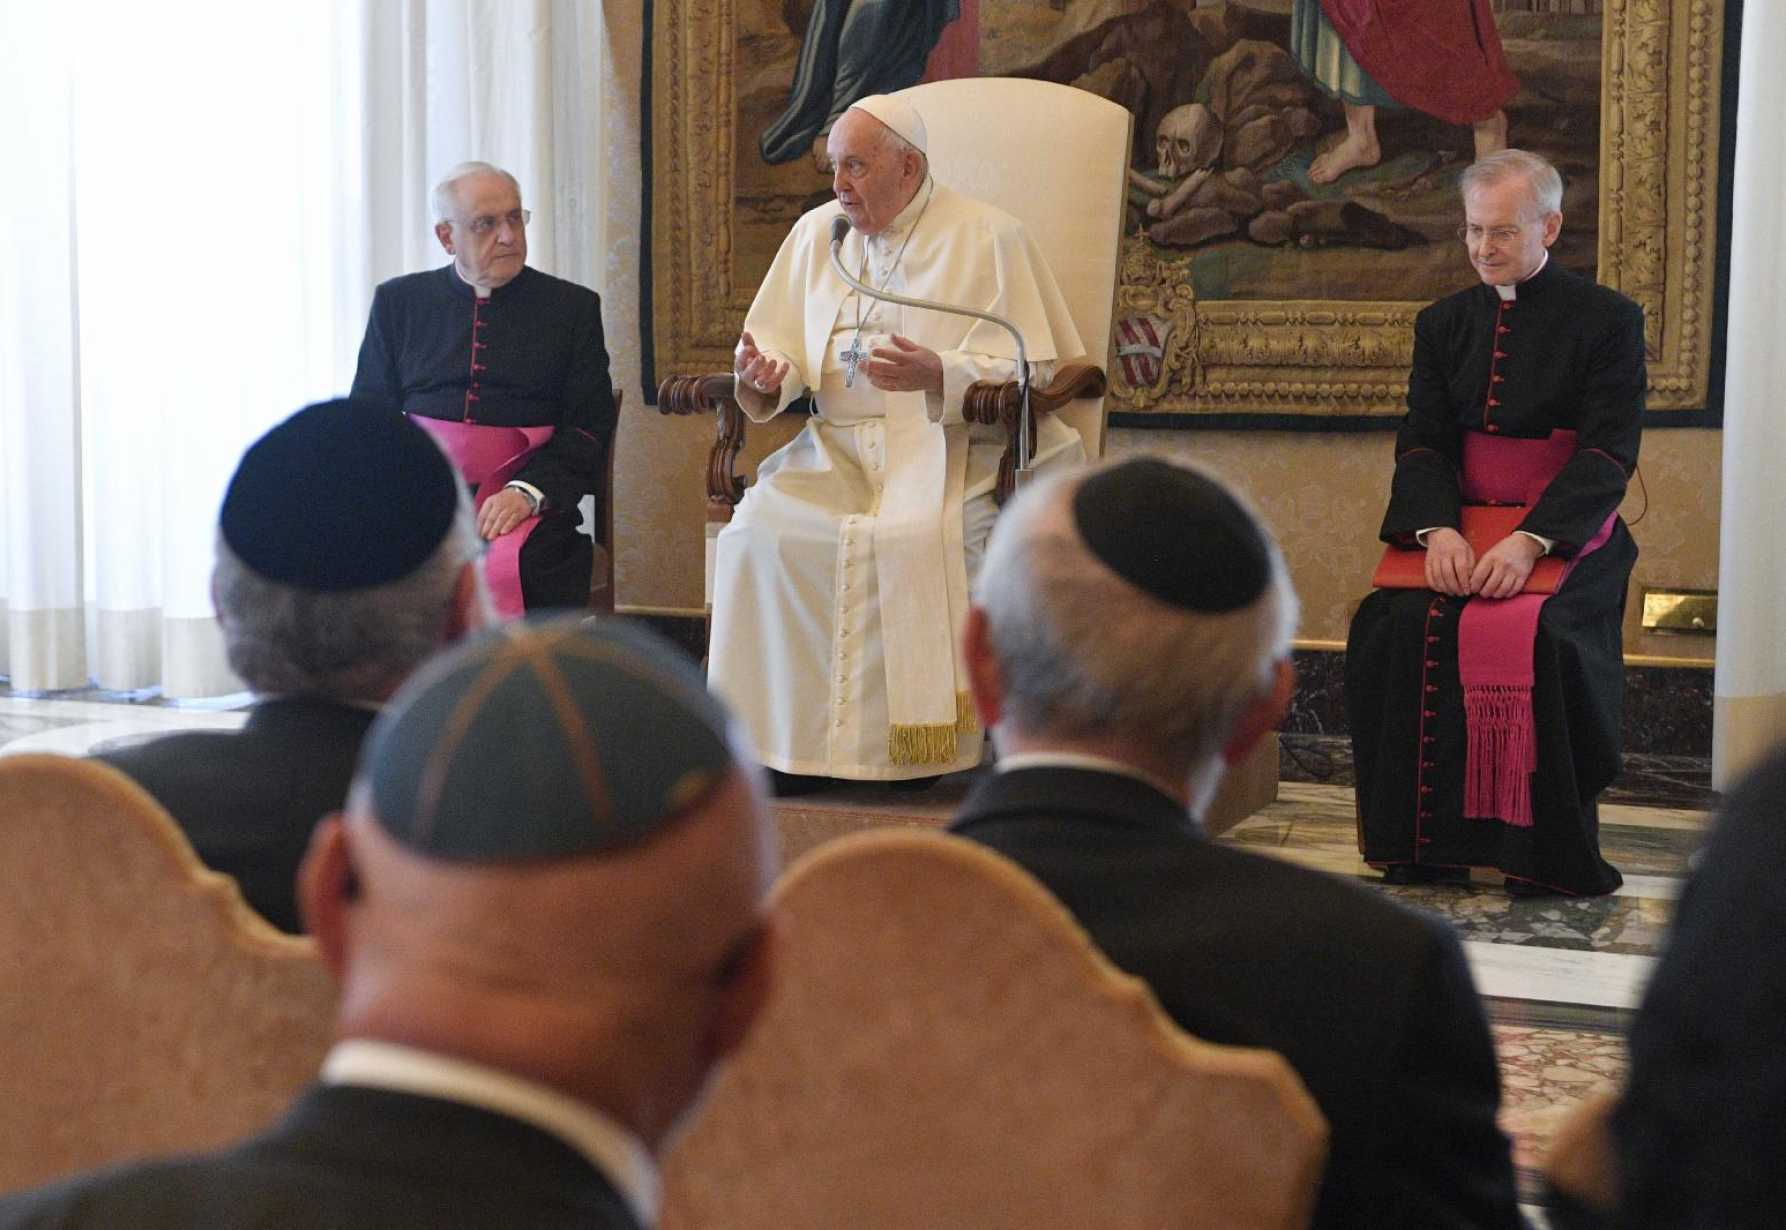 Faith is a call to dialogue and peacemaking, pope tells rabbis